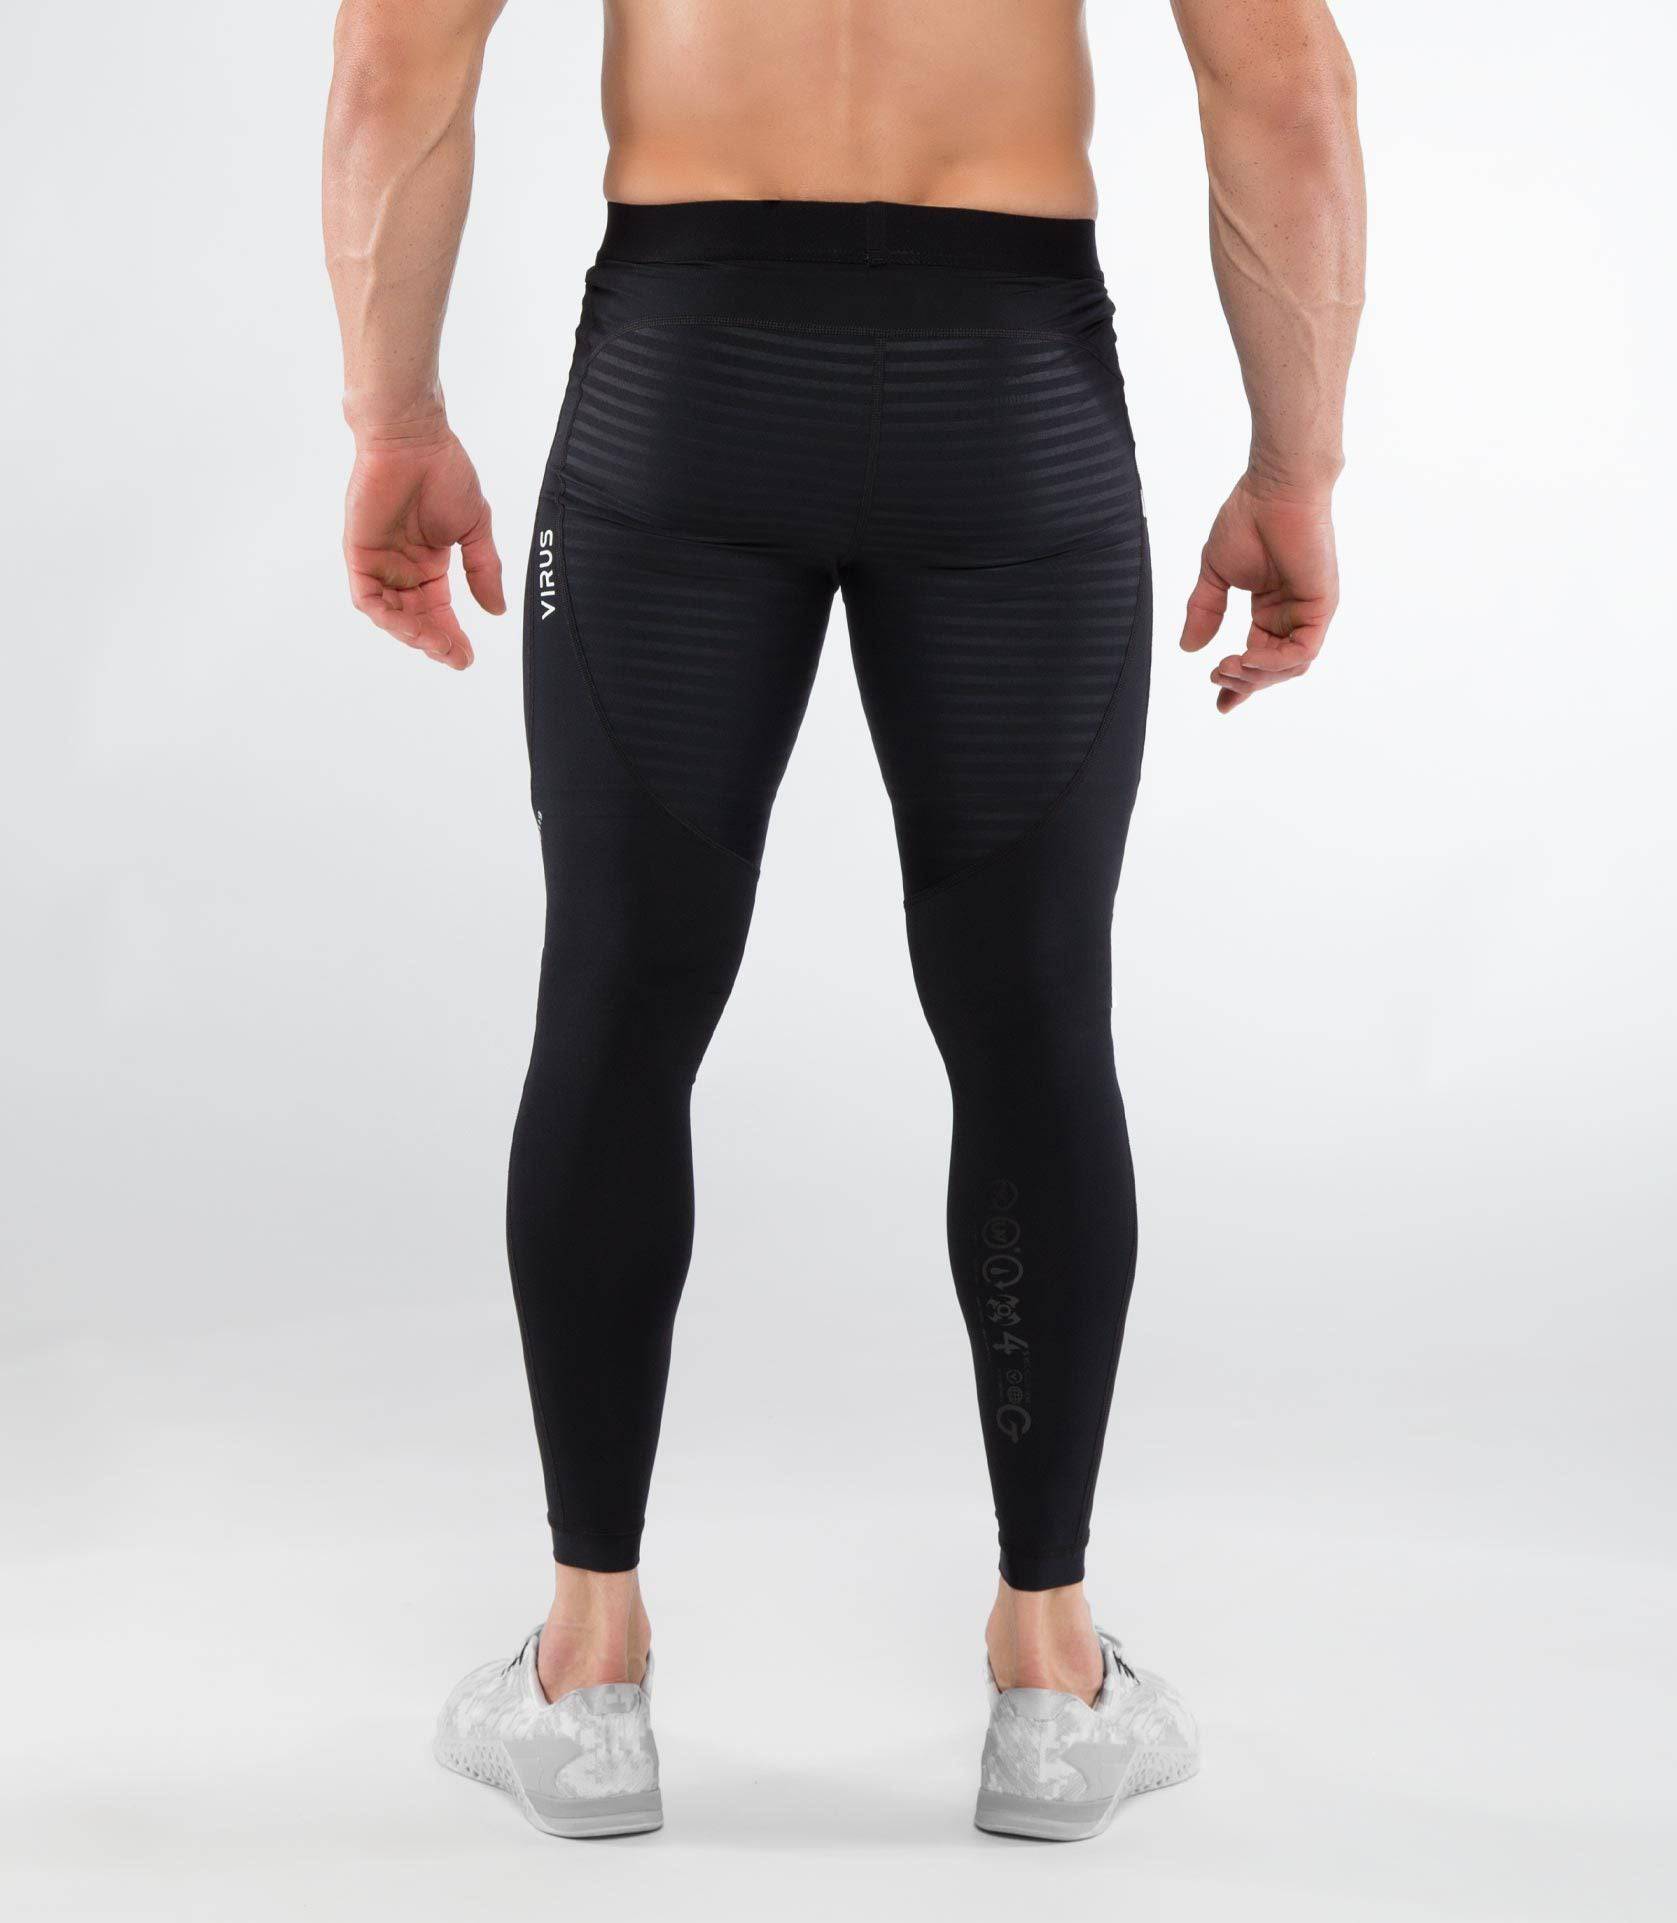 You NEED these Compression Pants - Virus